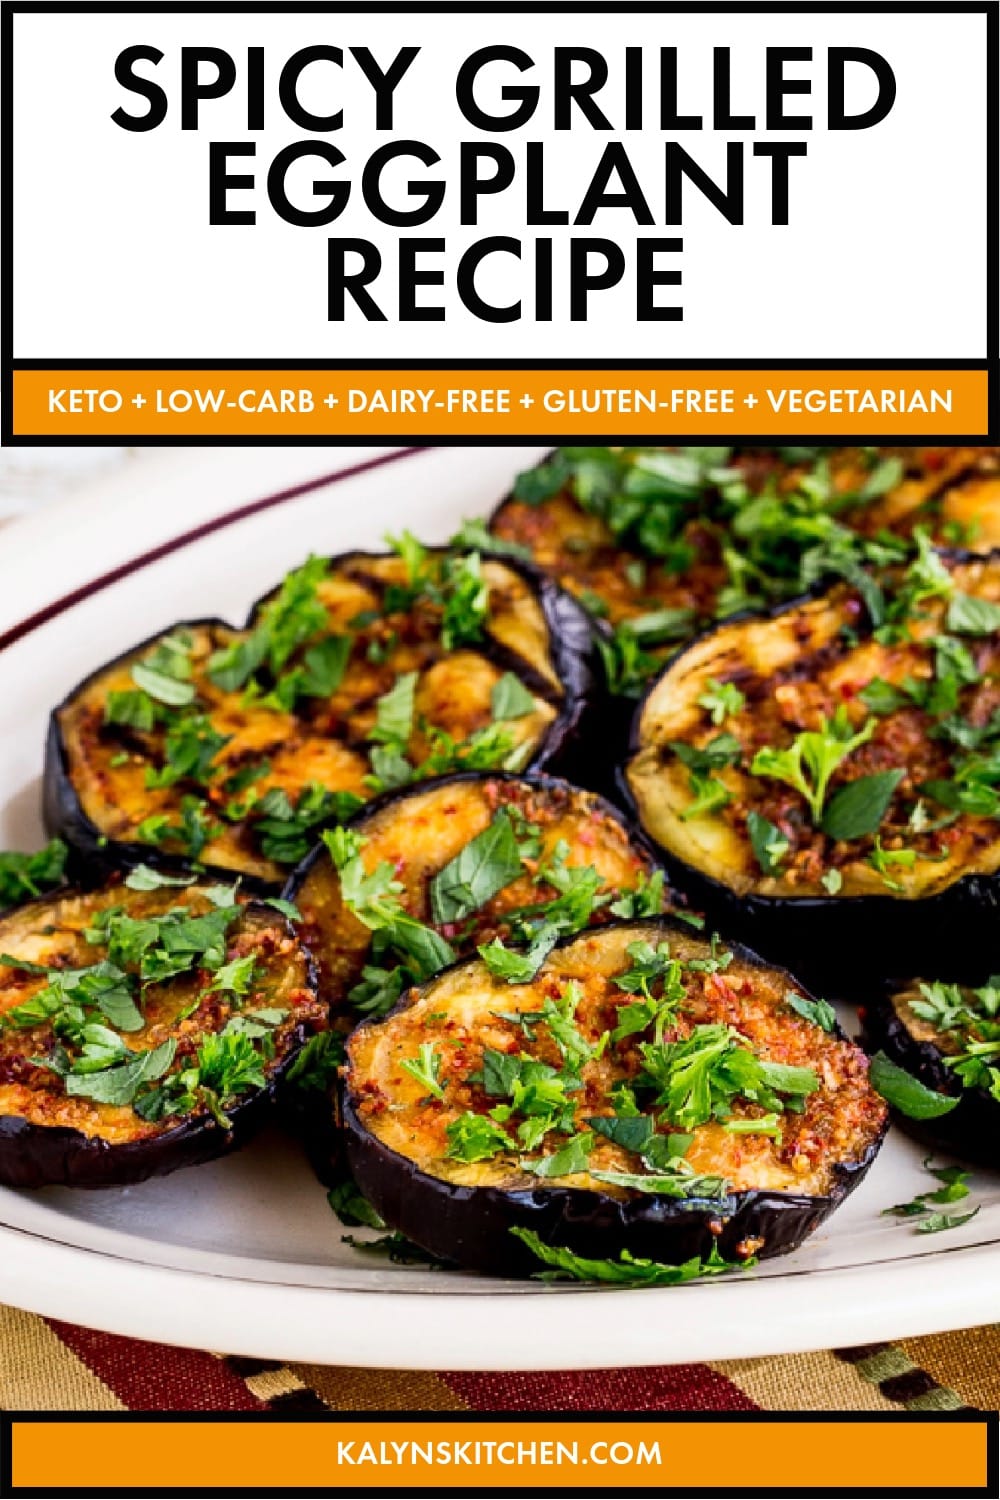 Pinterest image of Spicy Grilled Eggplant Recipe